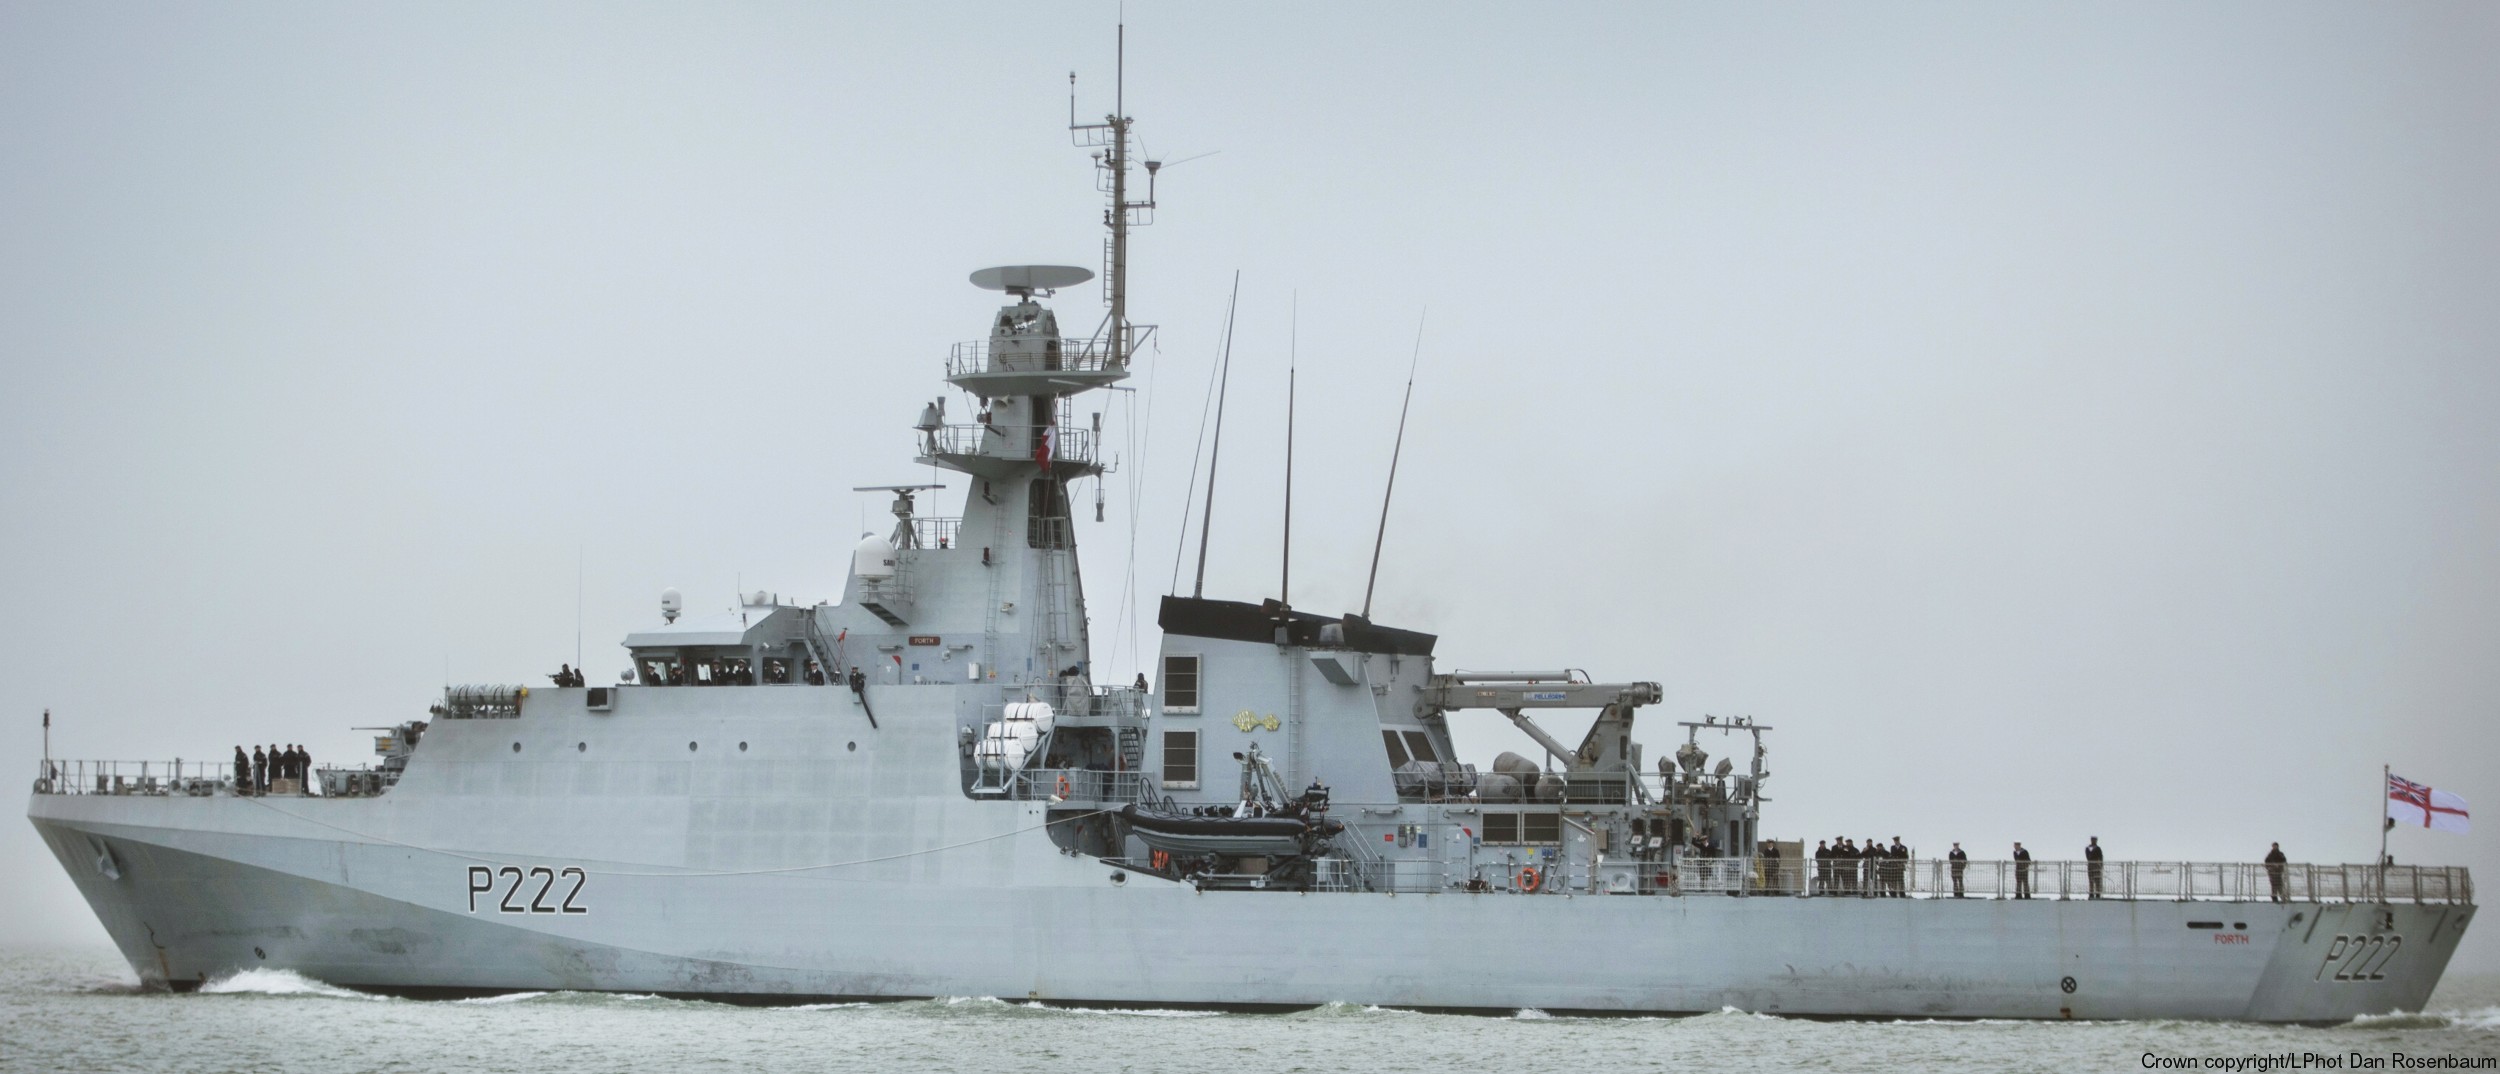 p222 hms forth river class offshore patrol vessel opv royal navy 14